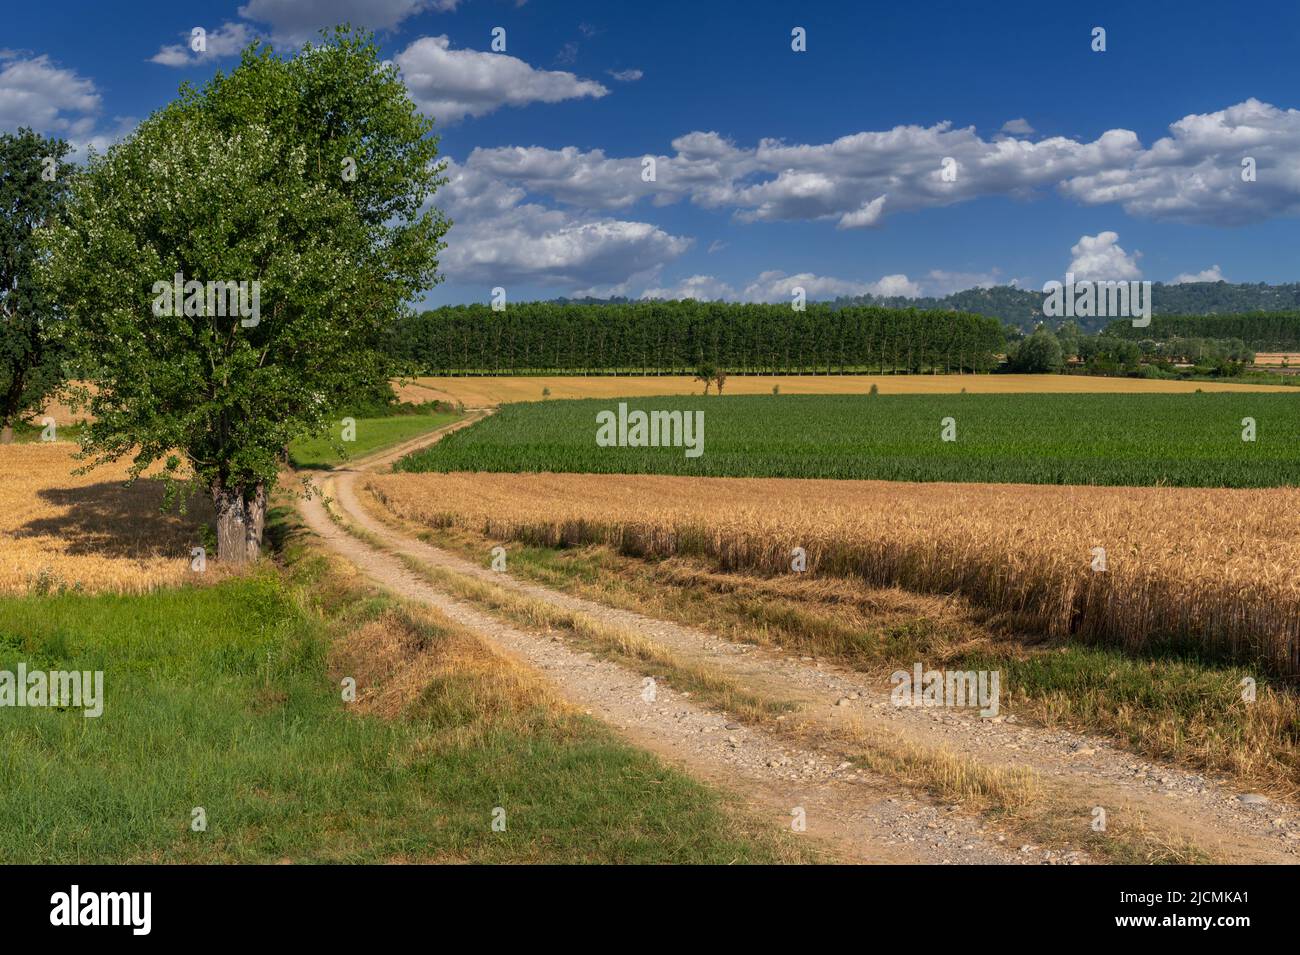 Country road between wheat and corn fields with poplar trees, countryside landscape in province of Cuneo, Italy on blue summer sky with clouds Stock Photo